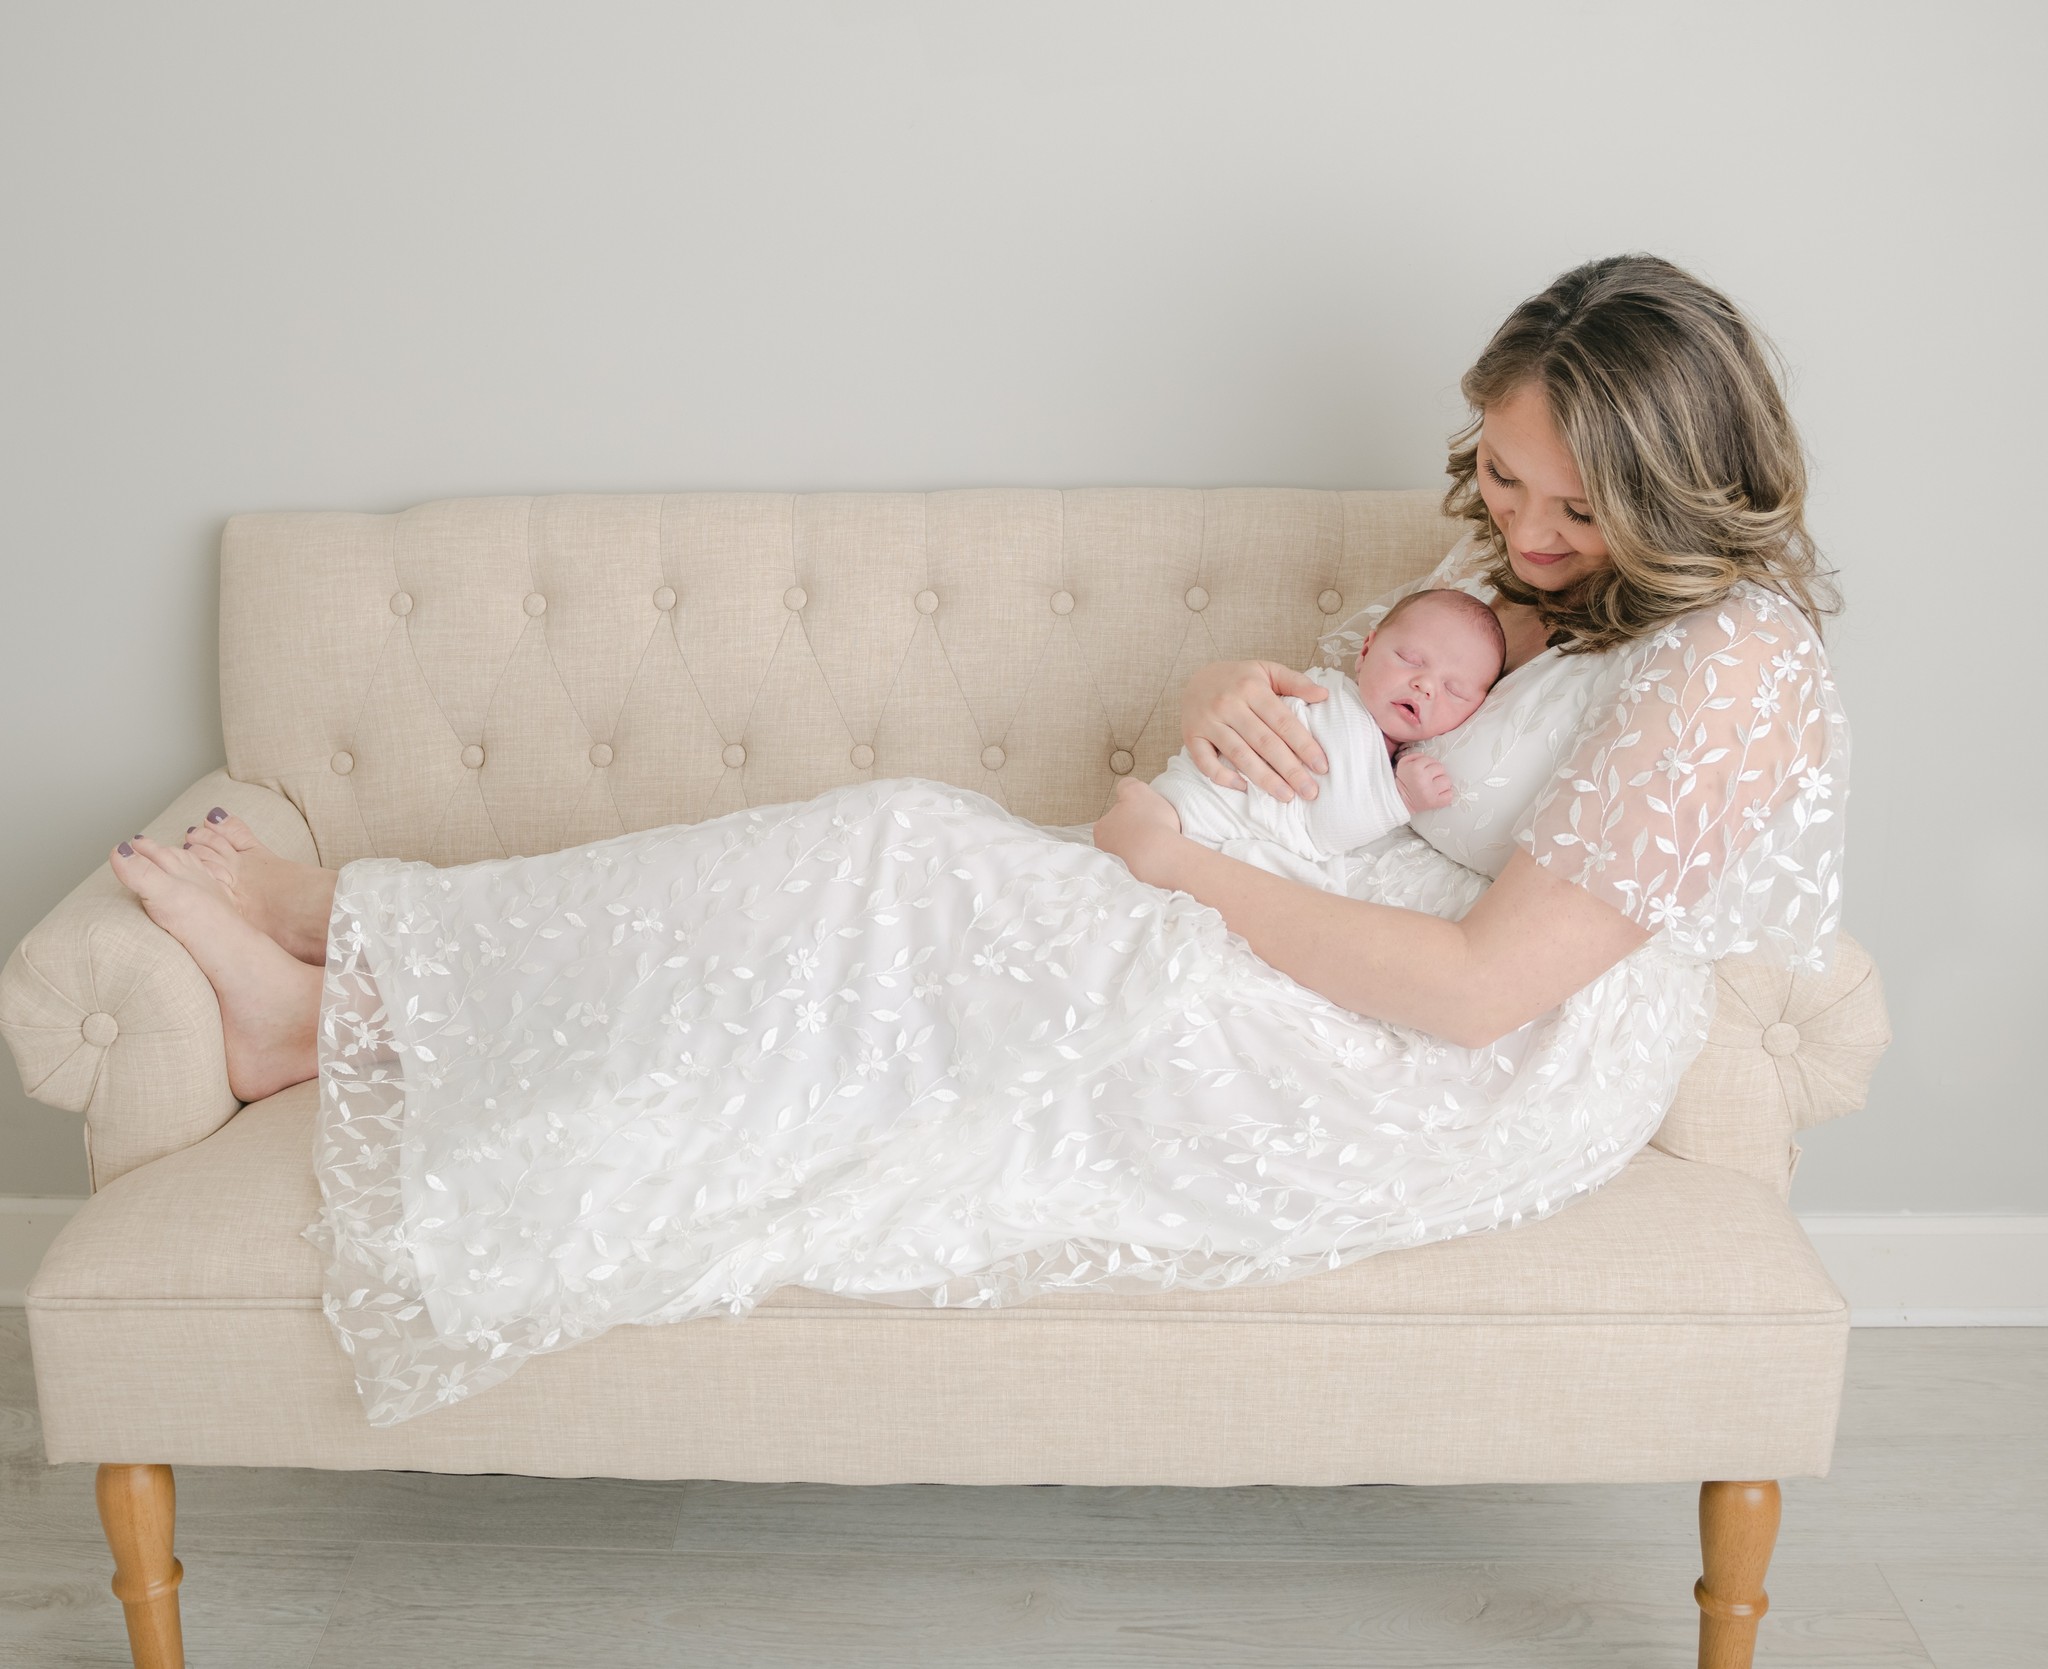 A mother in a lace dress lays across a small couch with her newborn baby sleeping on her chest rising moon midwifery